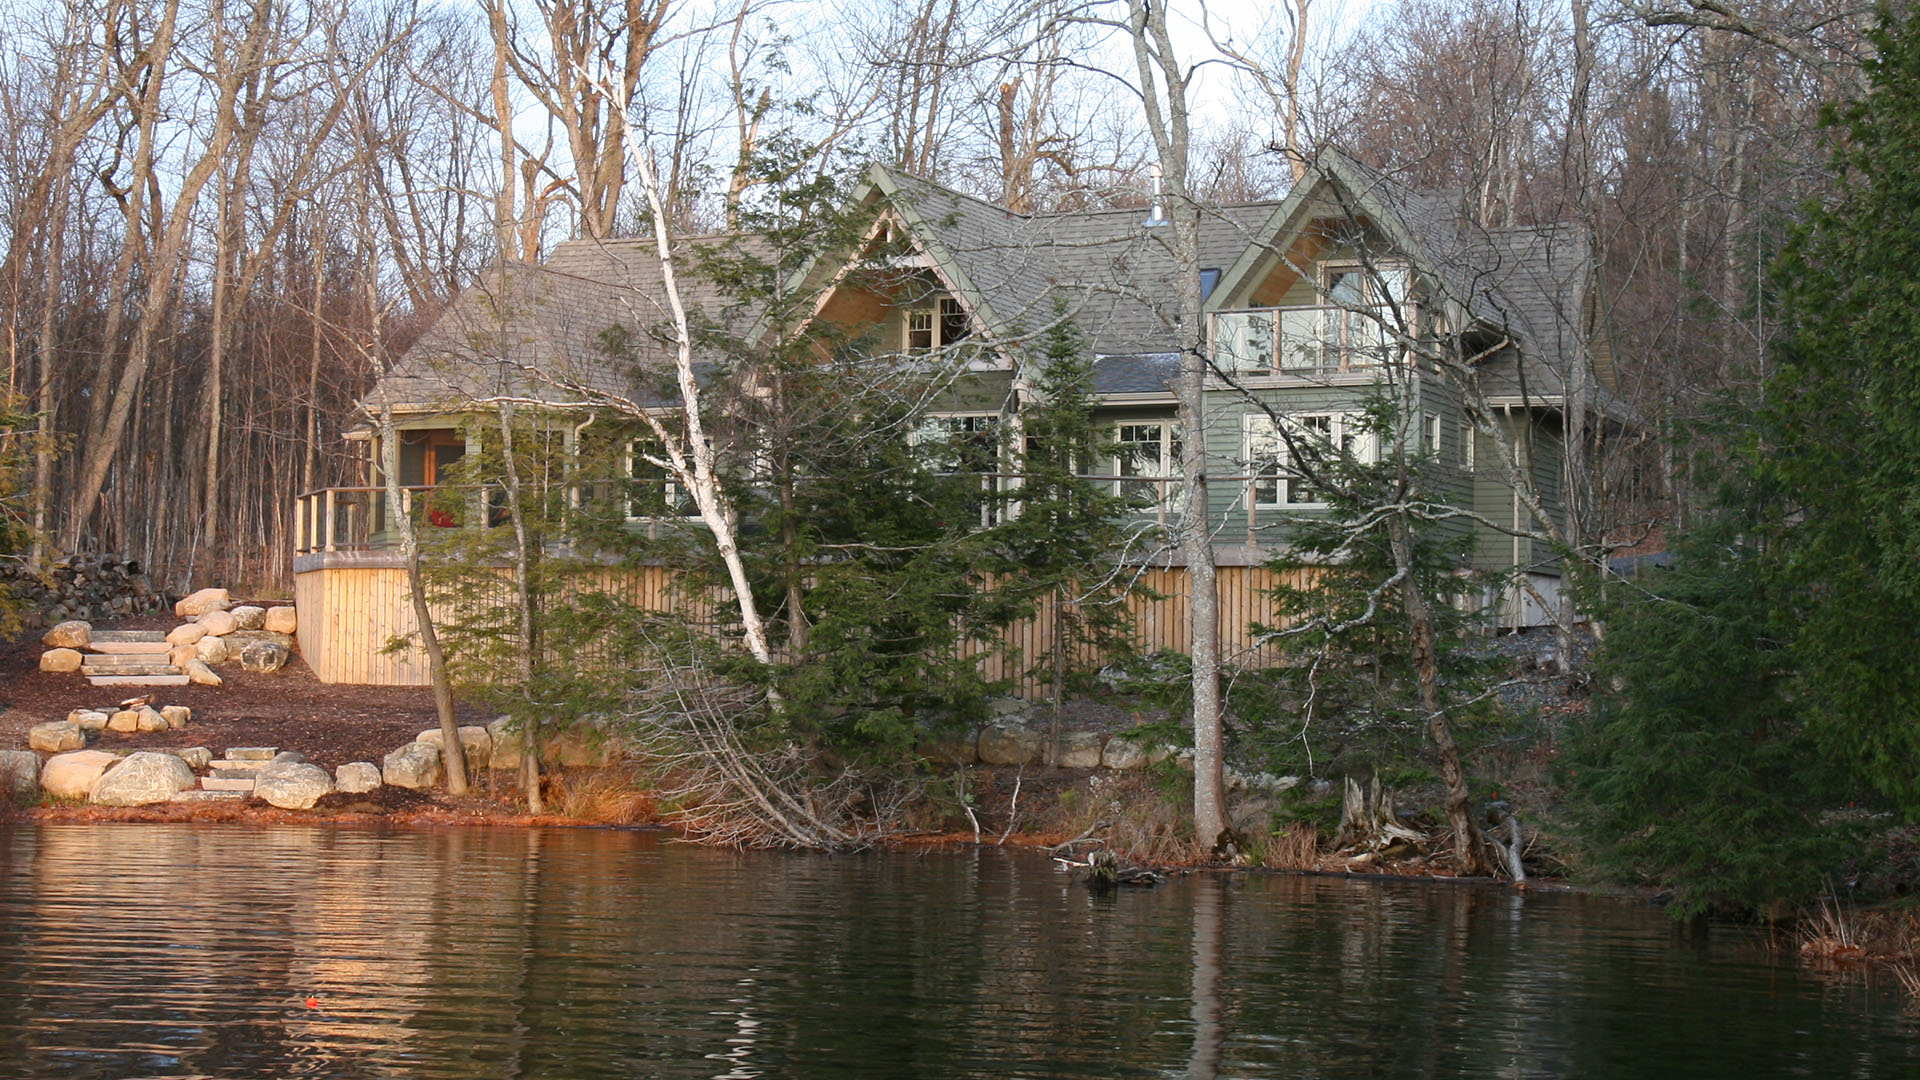 architect designed new lakefront cottage - parry sound - lake side view